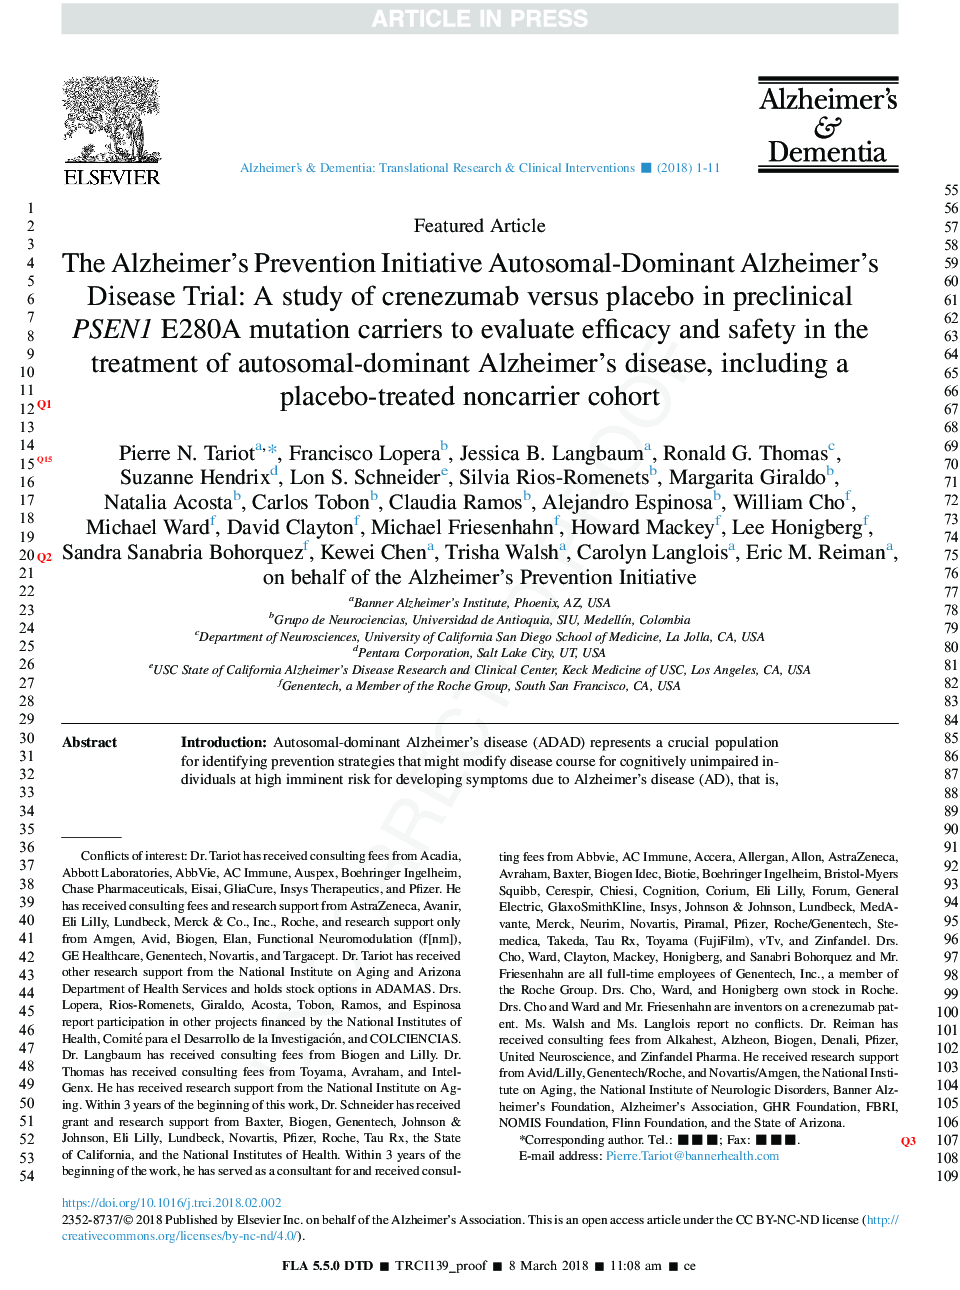 The Alzheimer's Prevention Initiative Autosomal-Dominant Alzheimer's Disease Trial: A study of crenezumab versus placebo in preclinical PSEN1 E280A mutation carriers to evaluate efficacy and safety in the treatment of autosomal-dominant Alzheimer's diseas